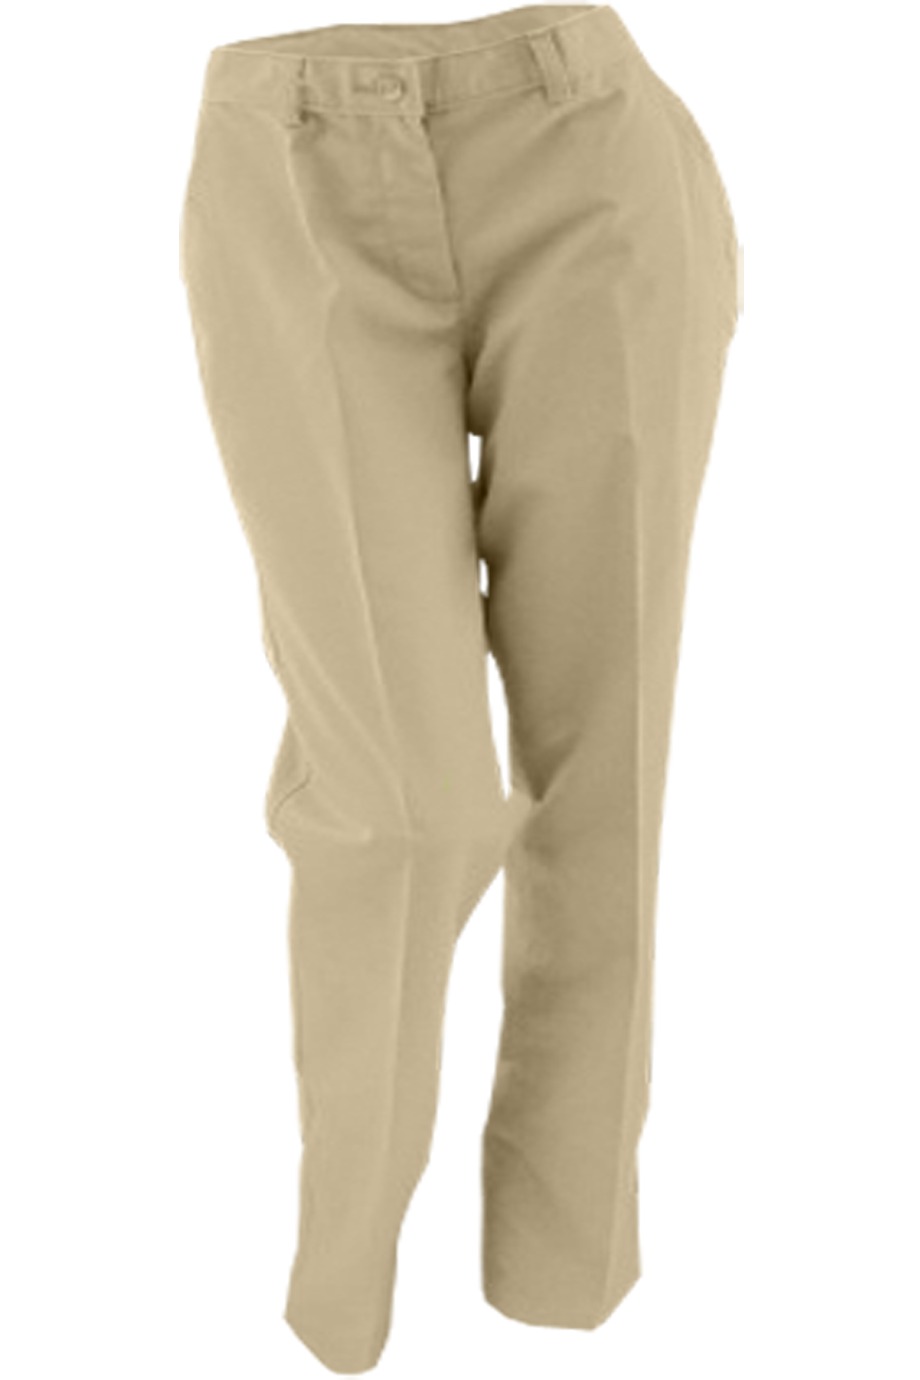 Edward's Women's Flat Front Blended Chino Pants